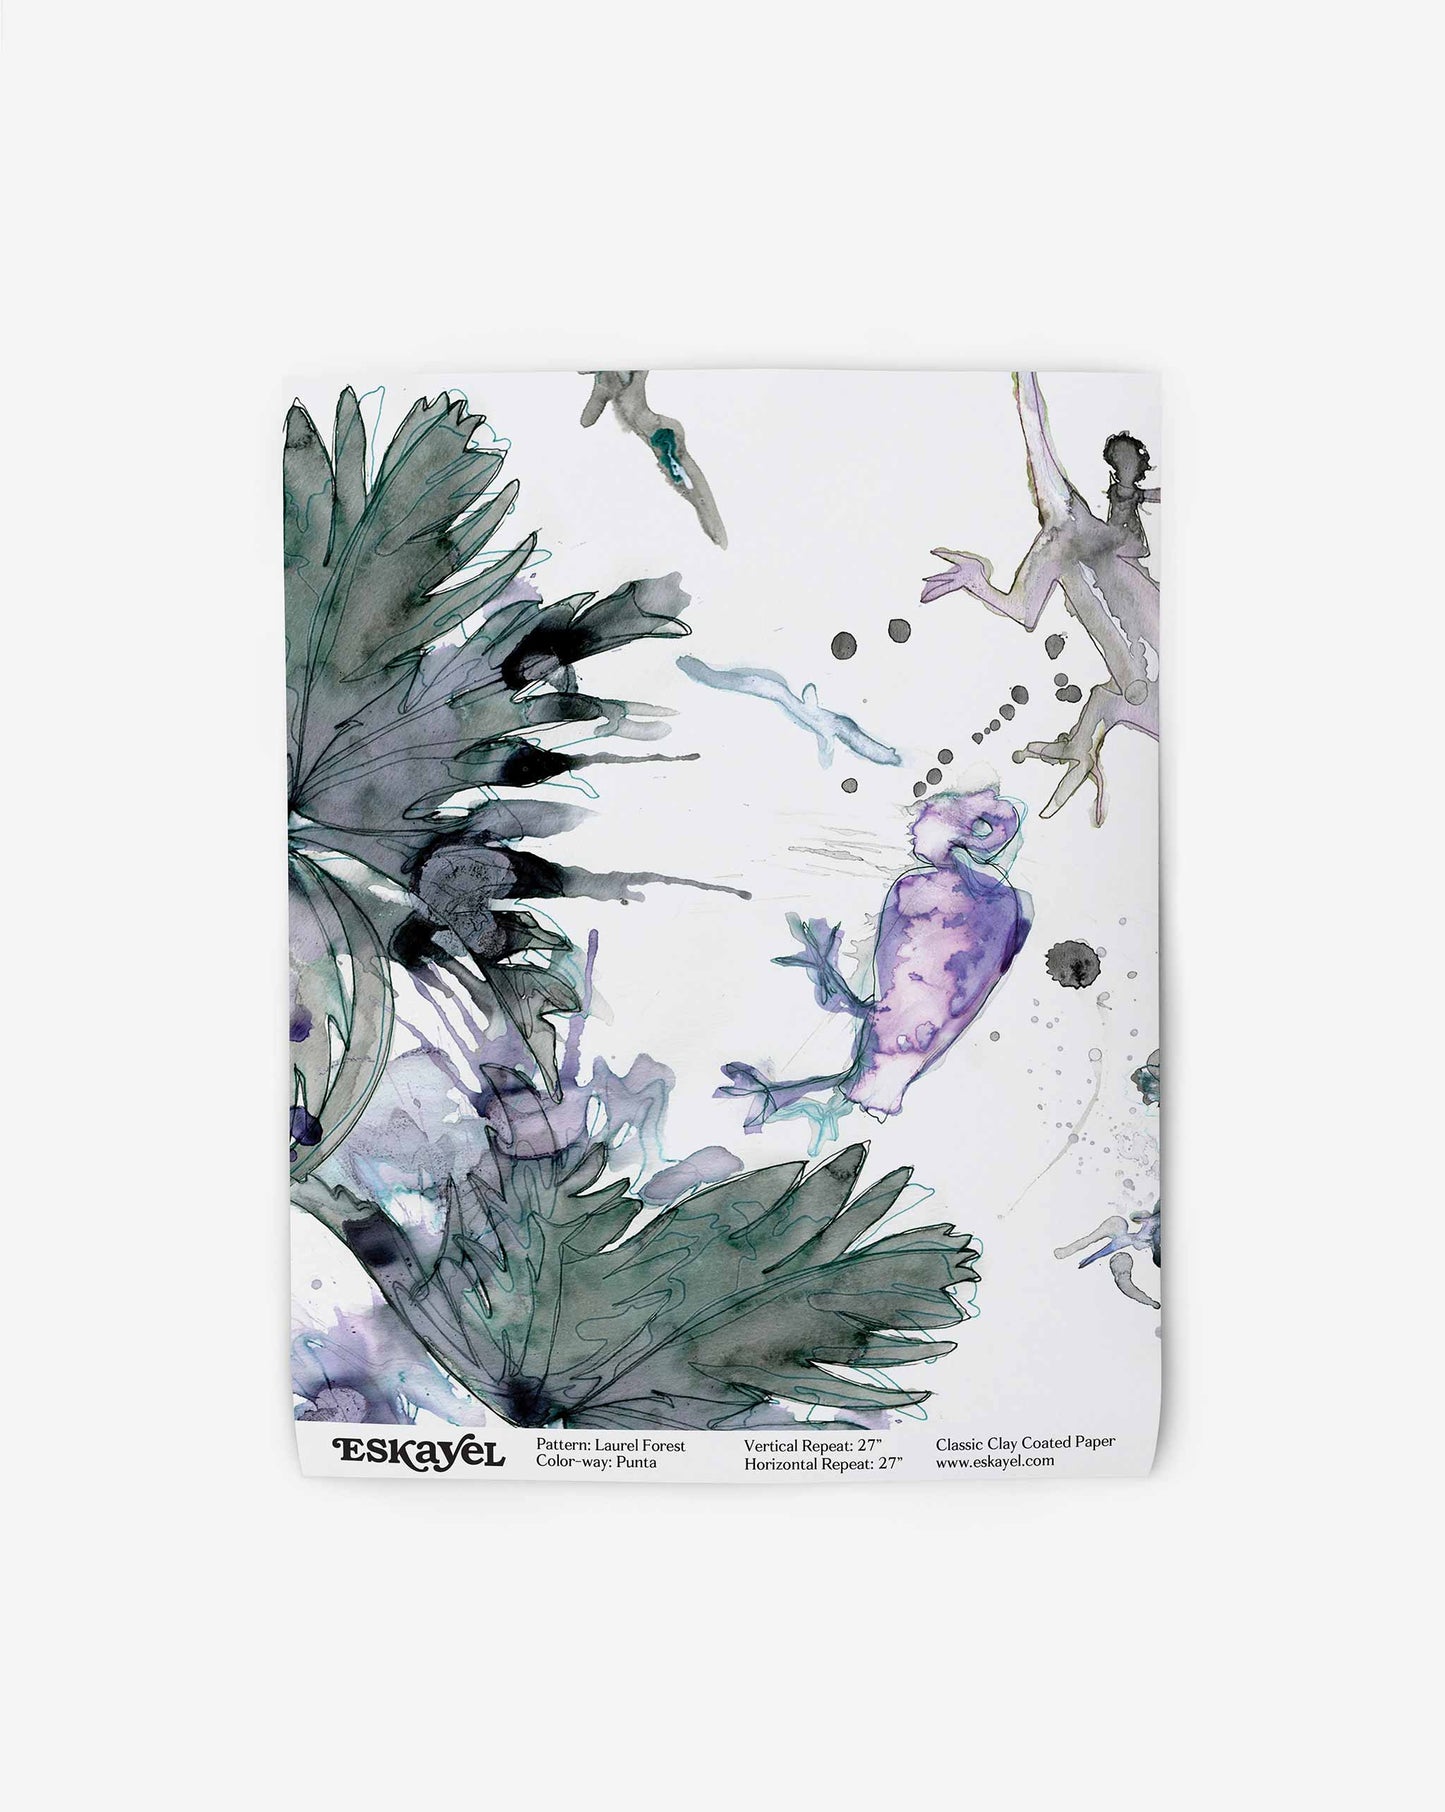 A Laurel Forest Wallpaper featuring abstract splashes and whimsical figures interacting with large, leaf-like shapes in a tropical atmosphere.